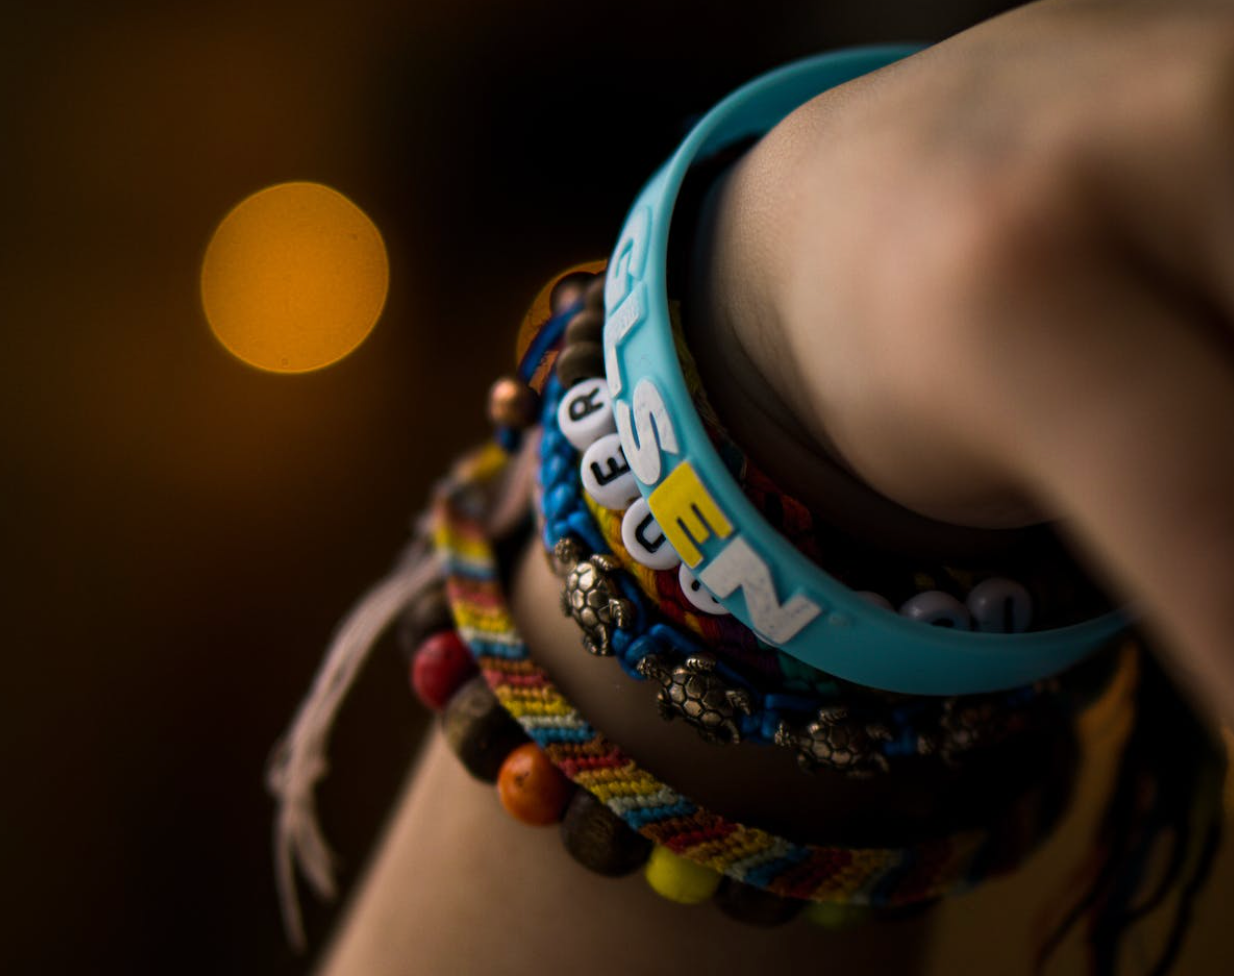 Different wrist bands on a female arm in a festival setting